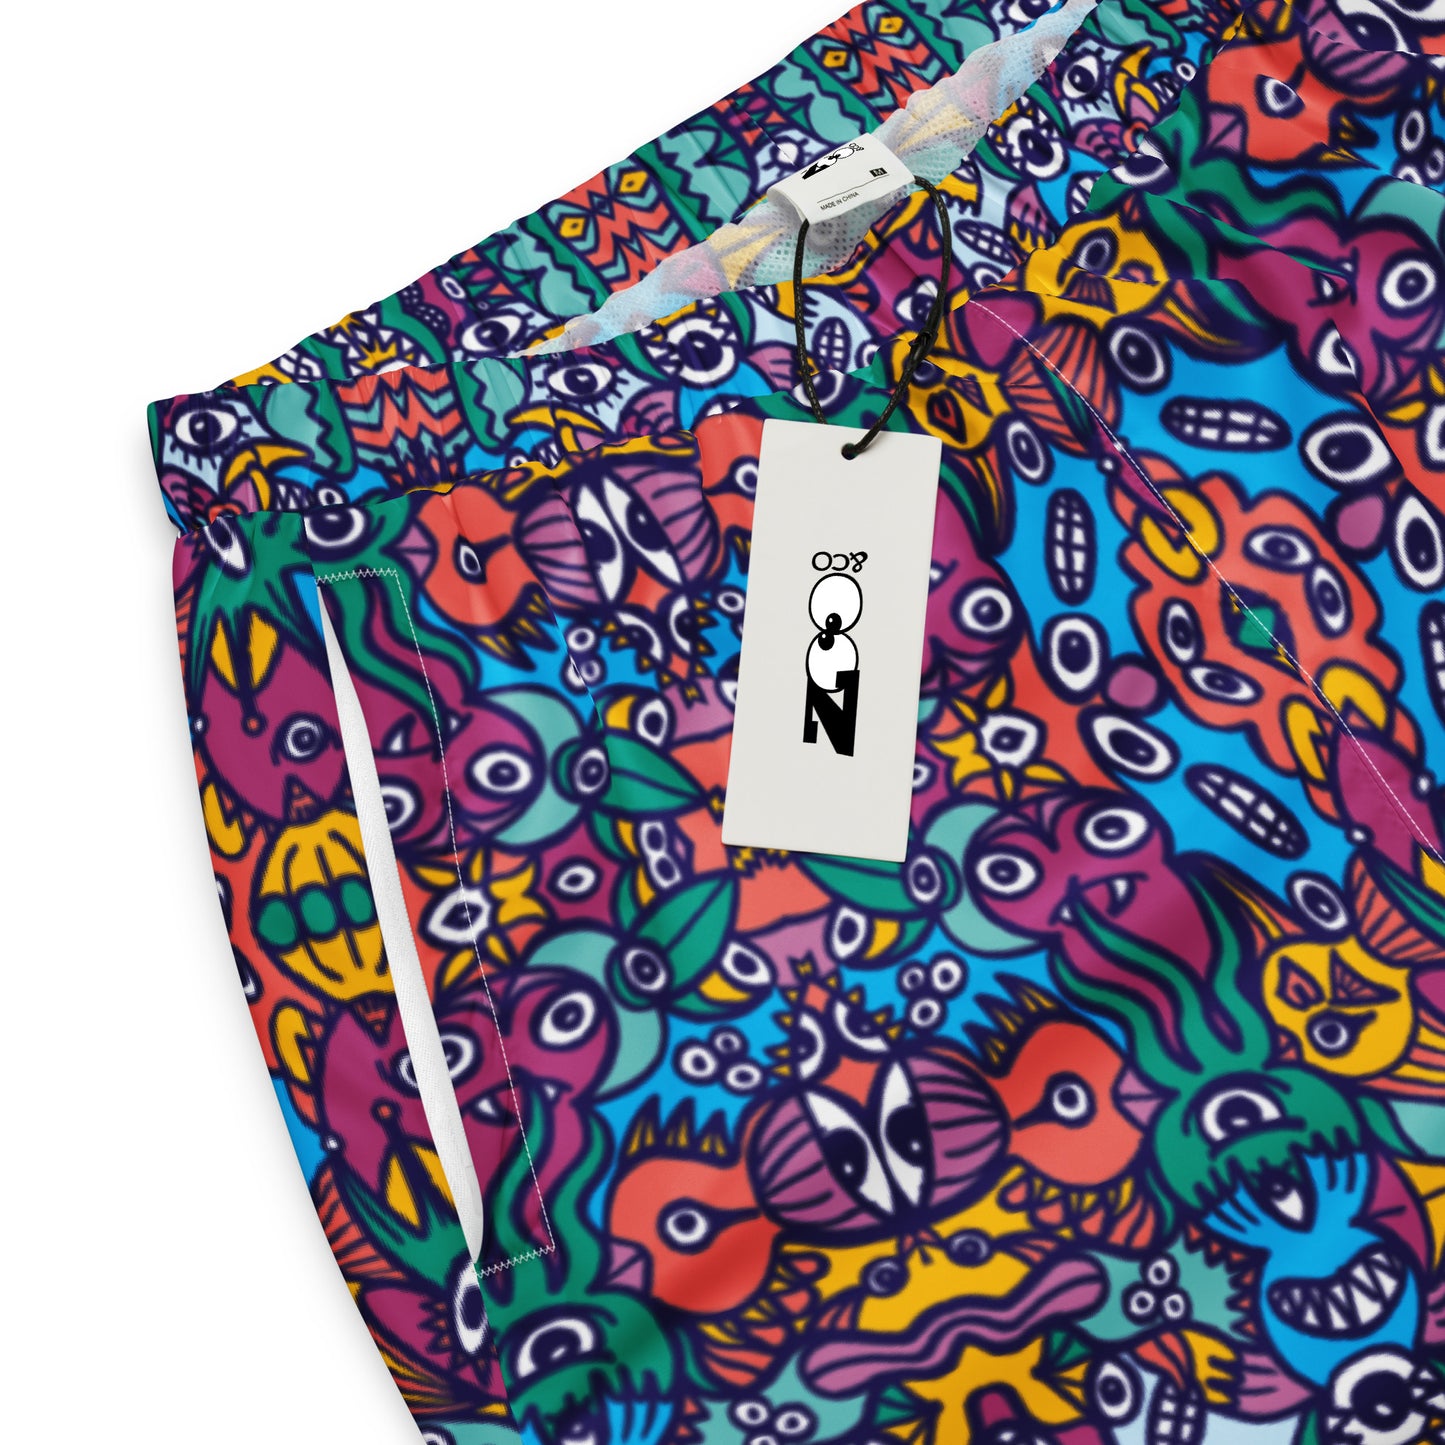 Whimsical design featuring multicolor critters from another world Unisex track pants. Product details